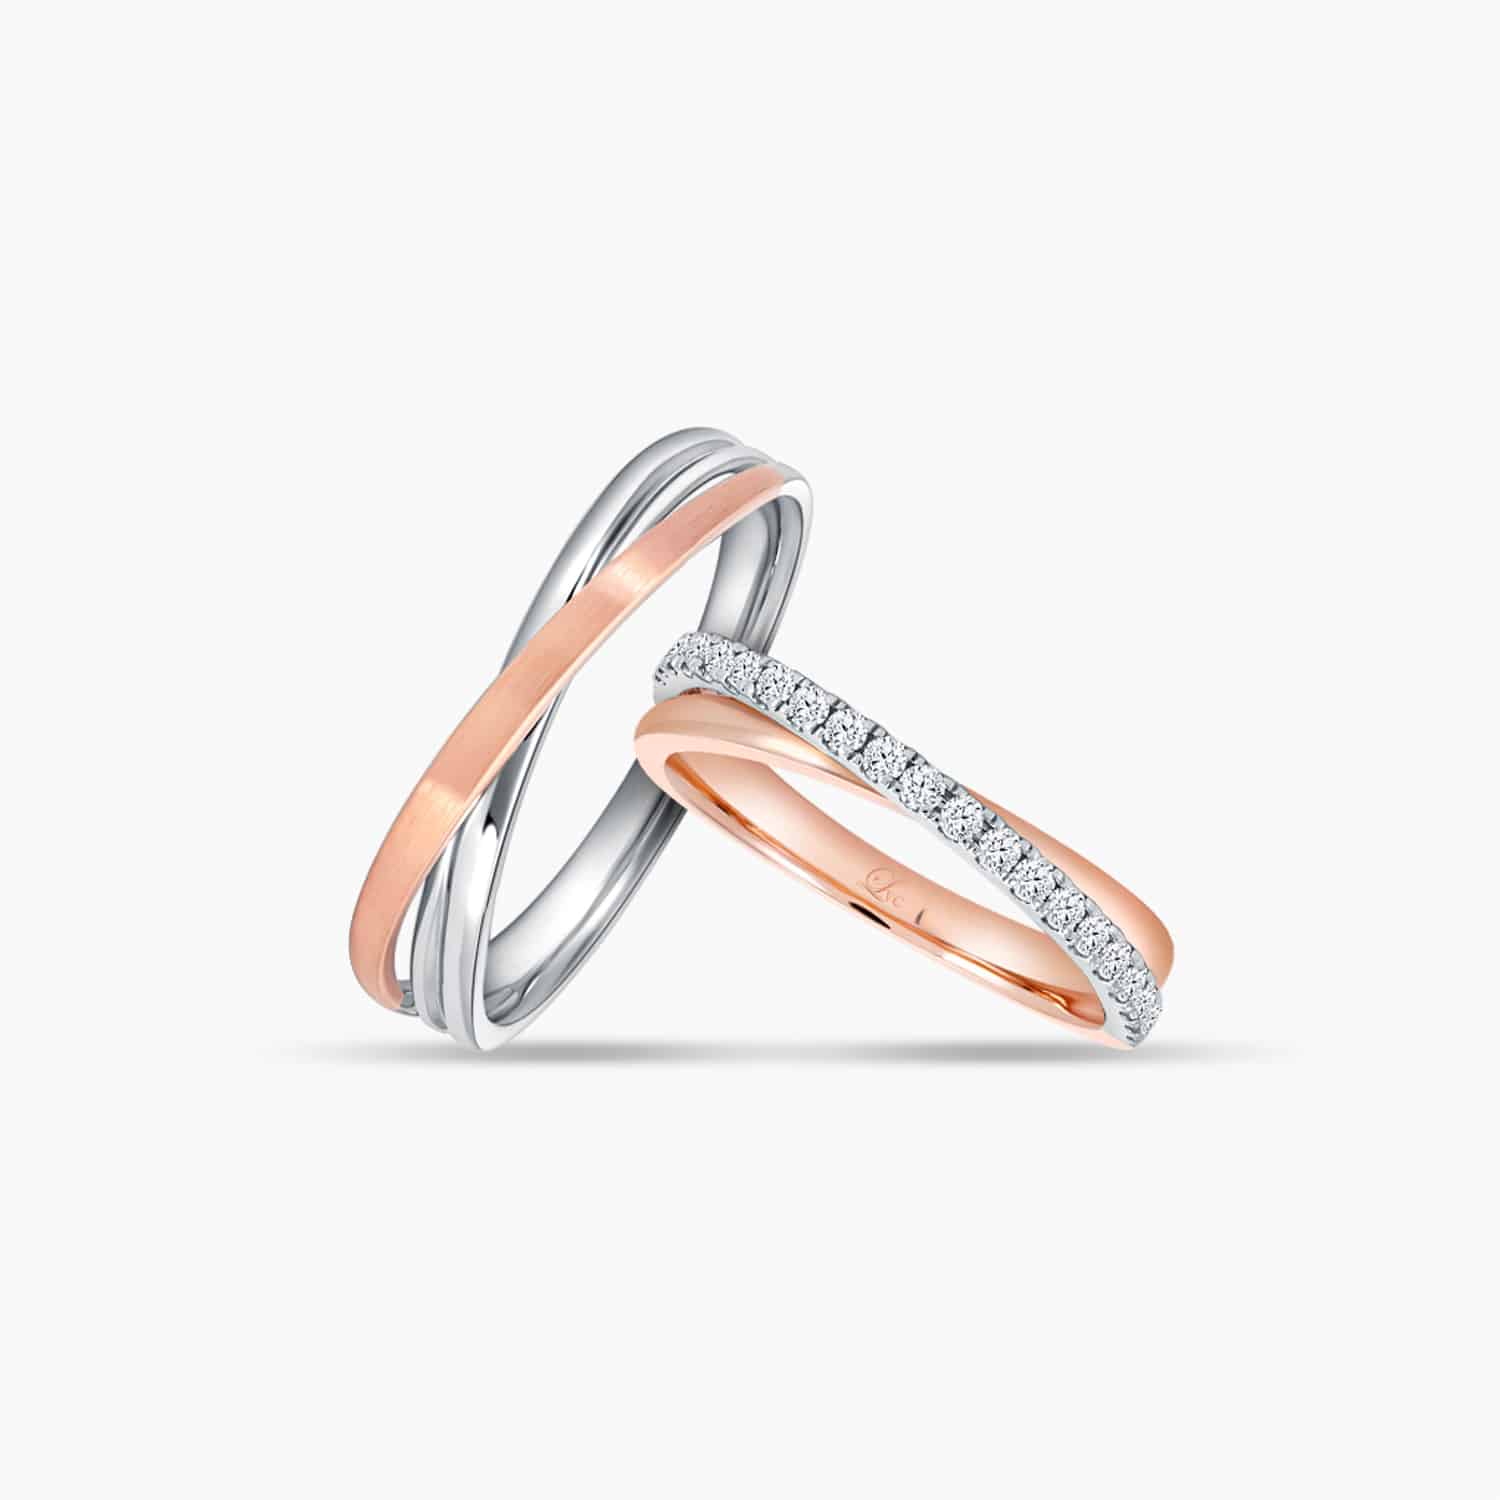 LVC Desirio Duet Couple Wedding Rings Set in Rose Gold and a Band of Diamonds